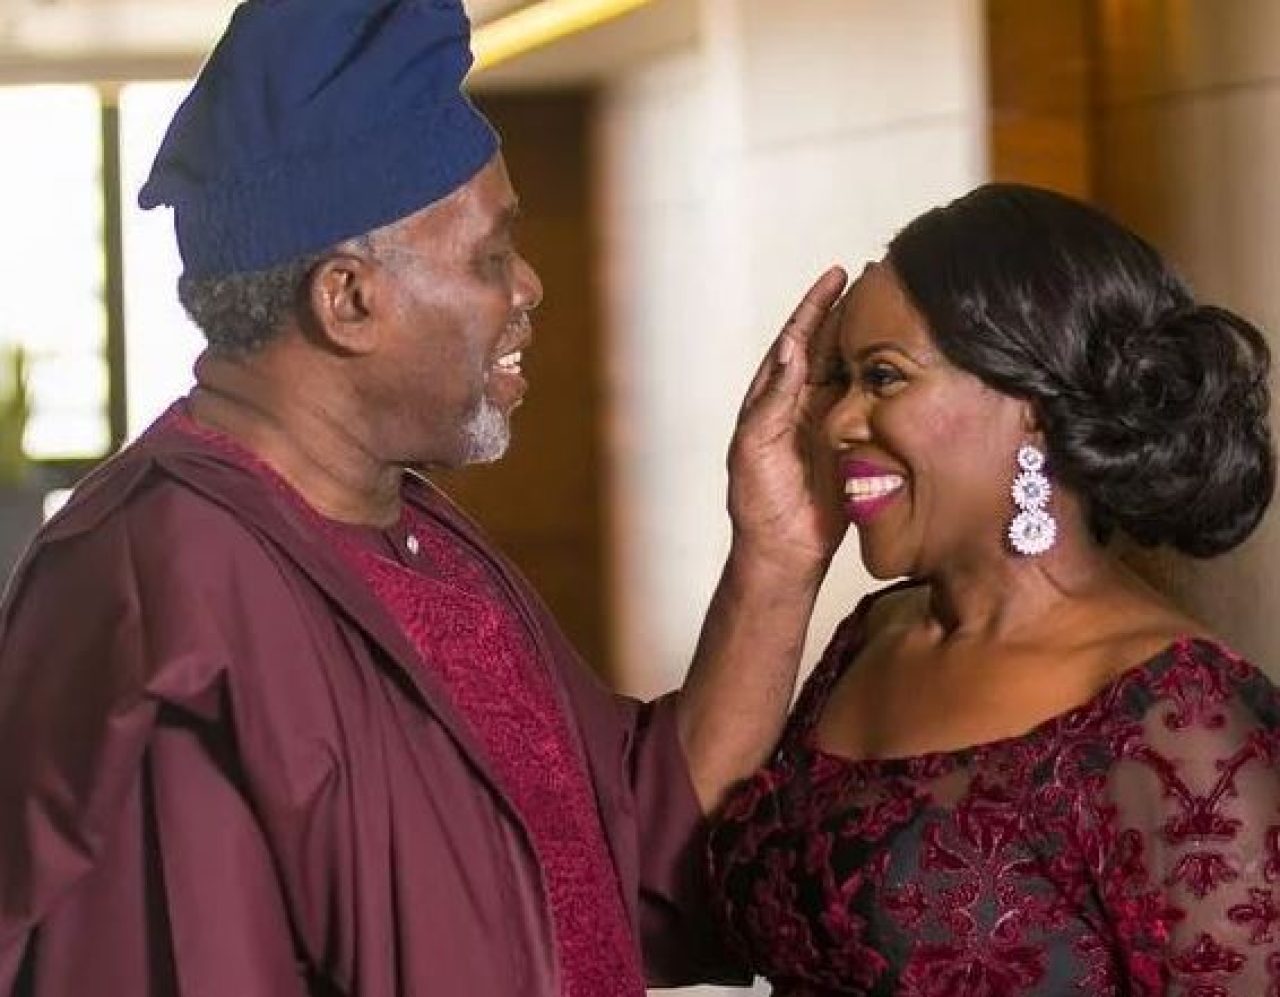 Joke Silva talks about marital difficulties: "Olu Jacobs, I knew is no longer there." AdvertAfrica News on afronewswire.com: Amplifying Africa's Voice | afronewswire.com | Breaking News & Stories